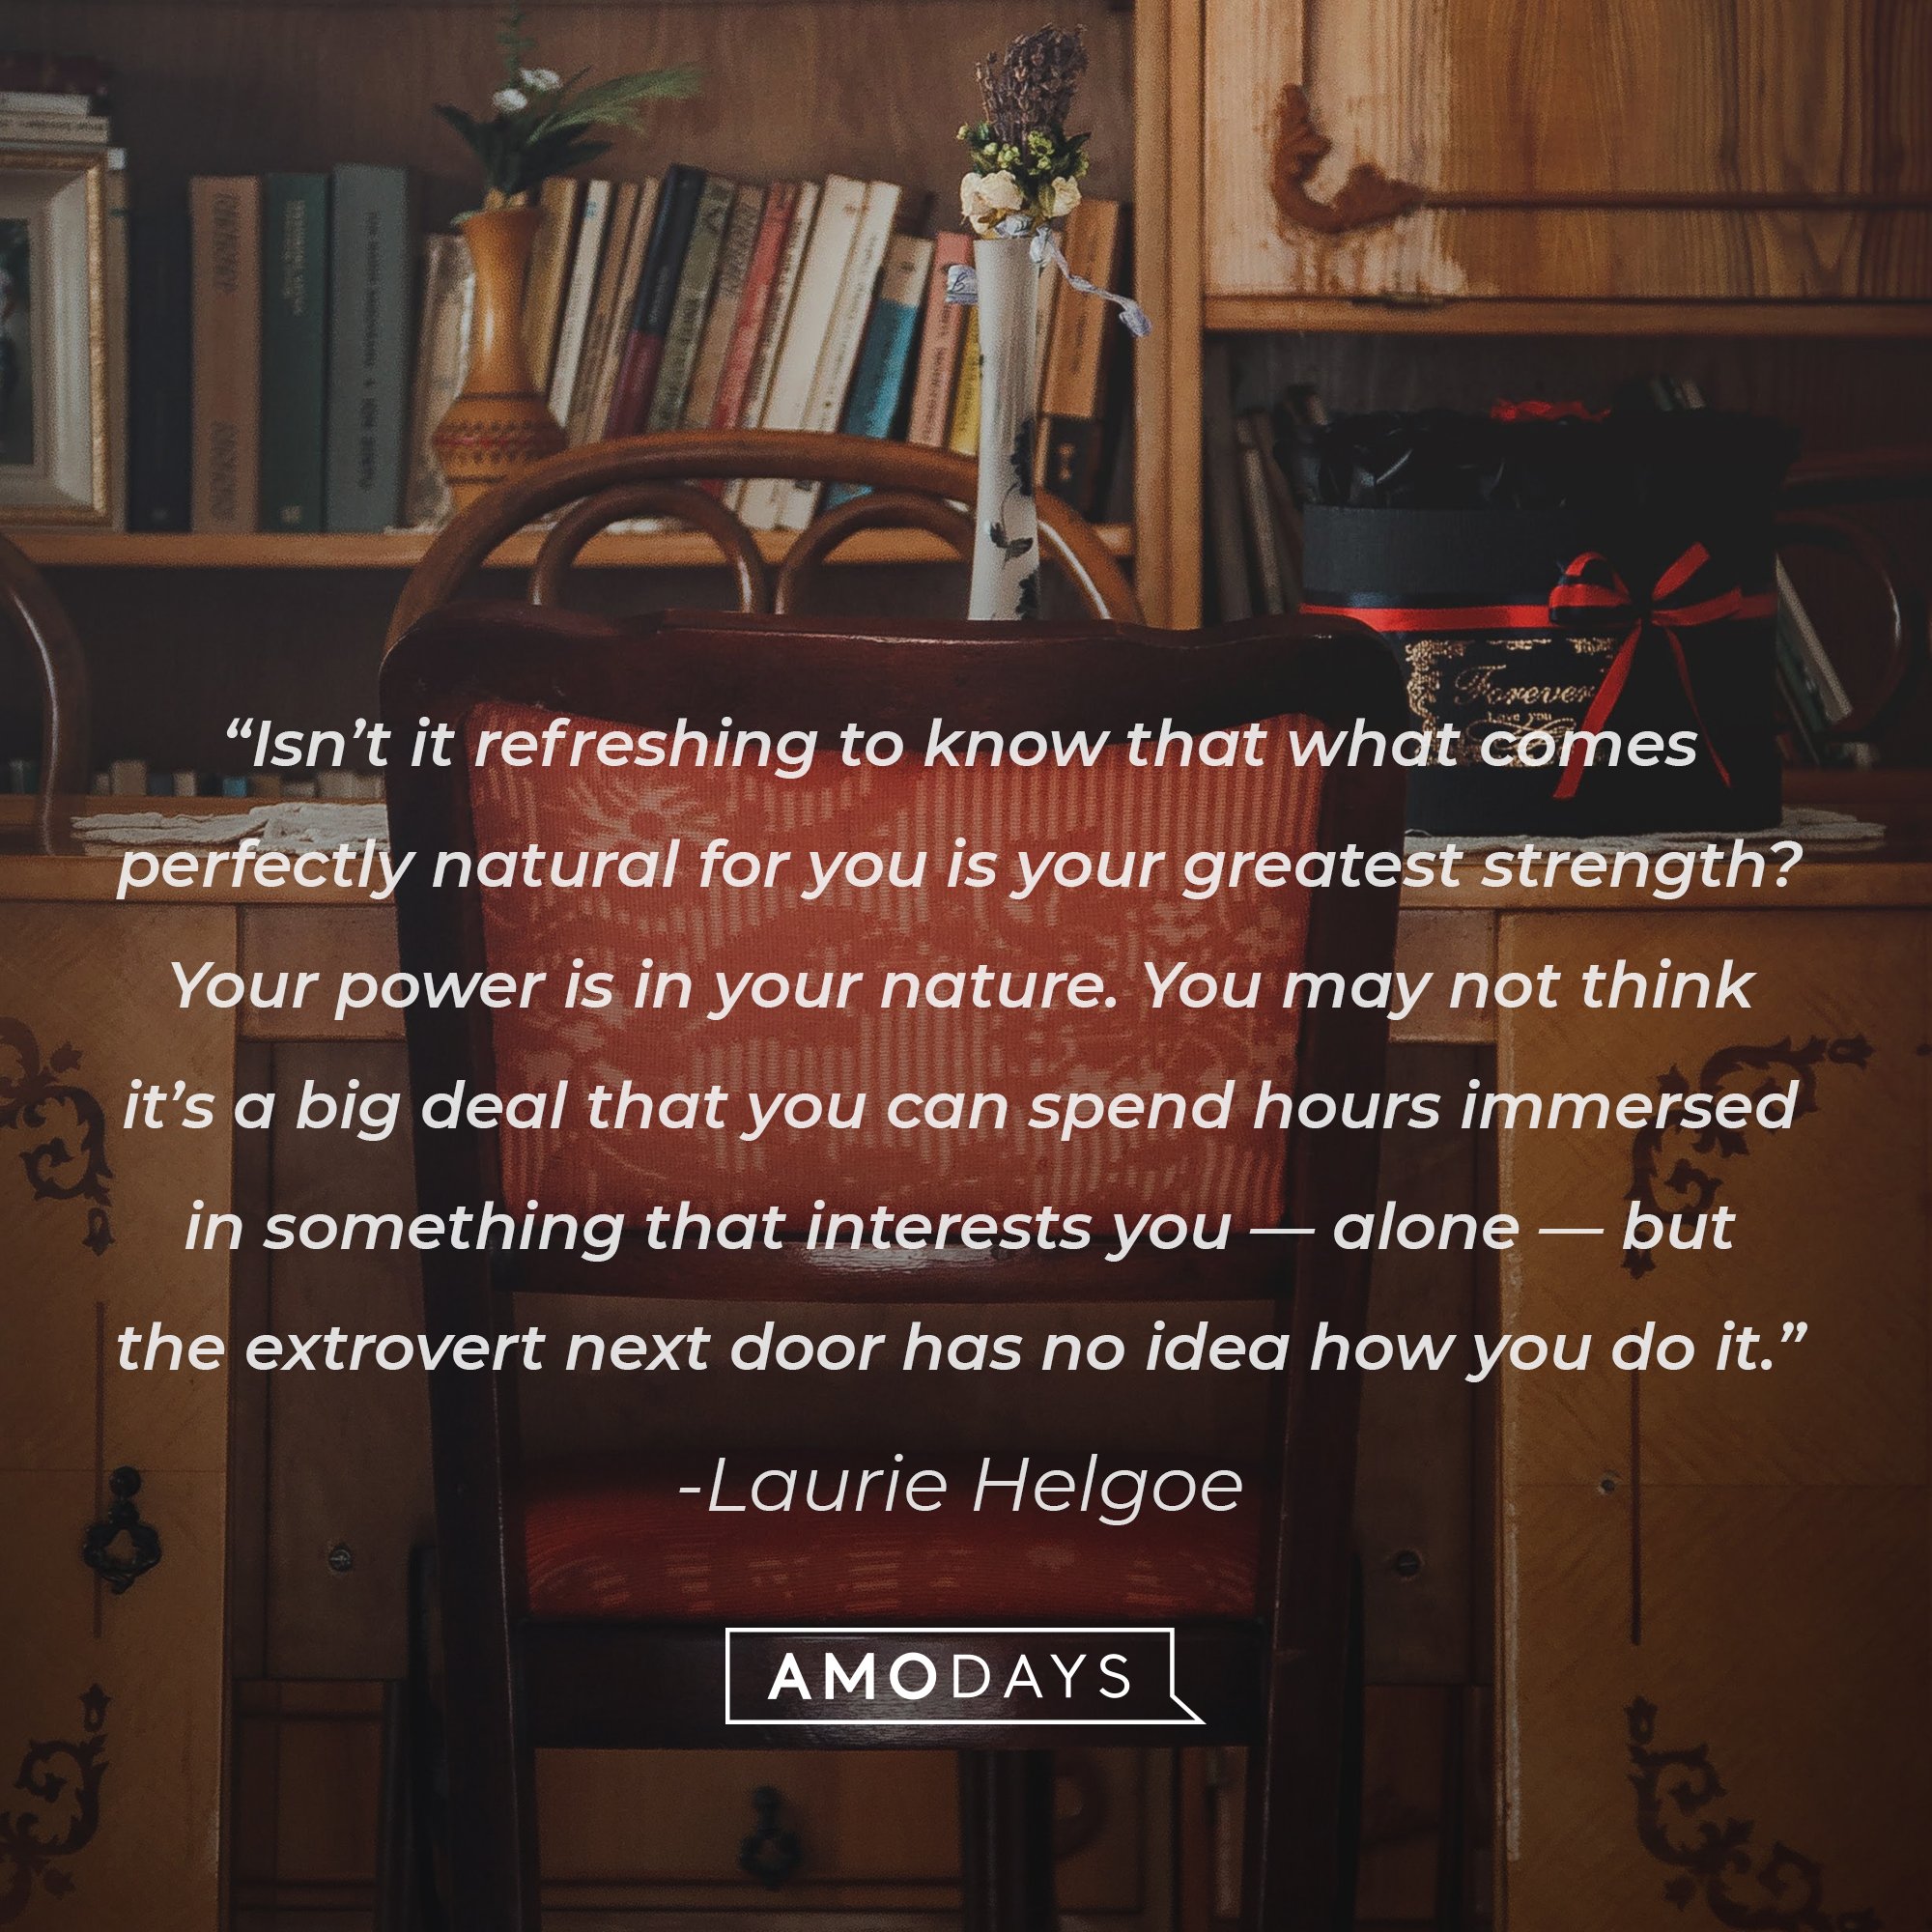  Laurie Helgoe's quote: “Isn’t it refreshing to know that what comes perfectly natural for you is your greatest strength? Your power is in your nature. You may not think it’s a big deal that you can spend hours immersed in something that interests you — alone — but the extrovert next door has no idea how you do it.” | Image: AmoDays